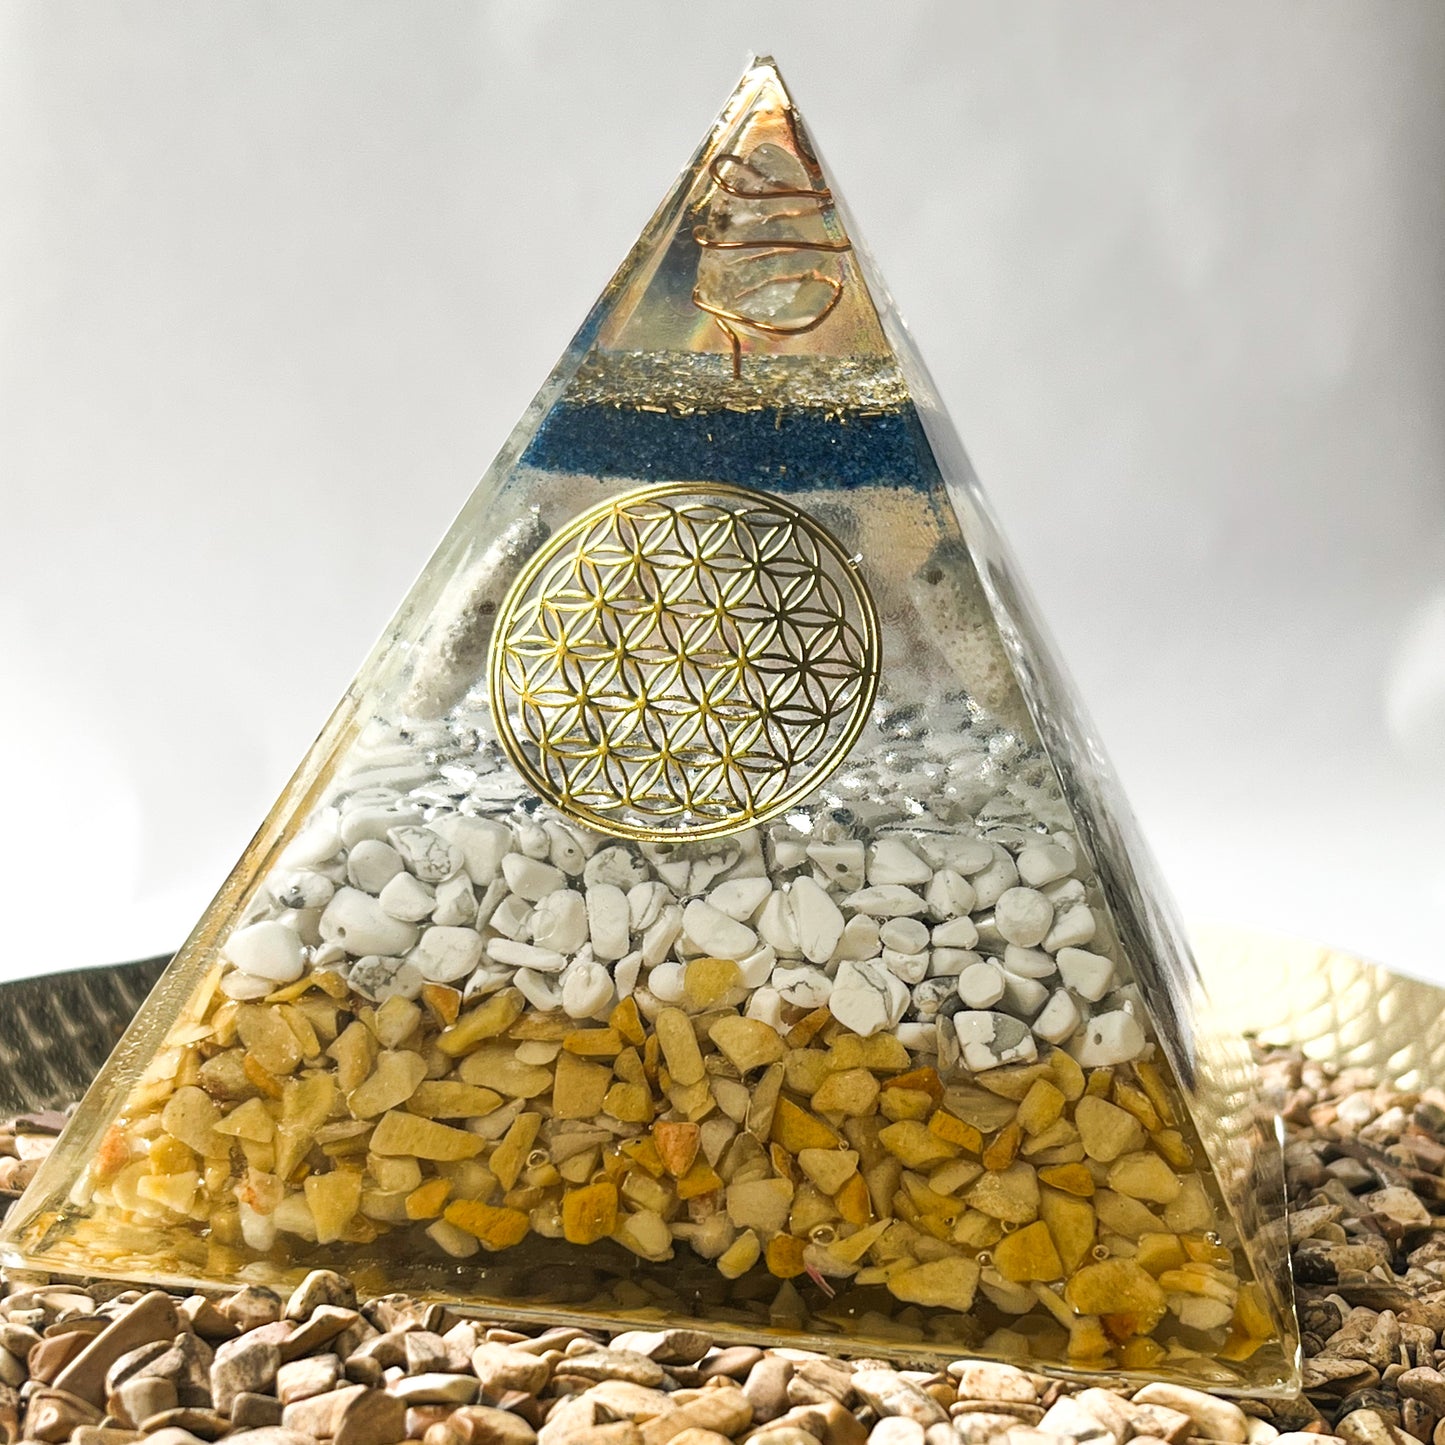 "Elegant orgonite pyramid for clearing negative energy and promoting positivity in your space